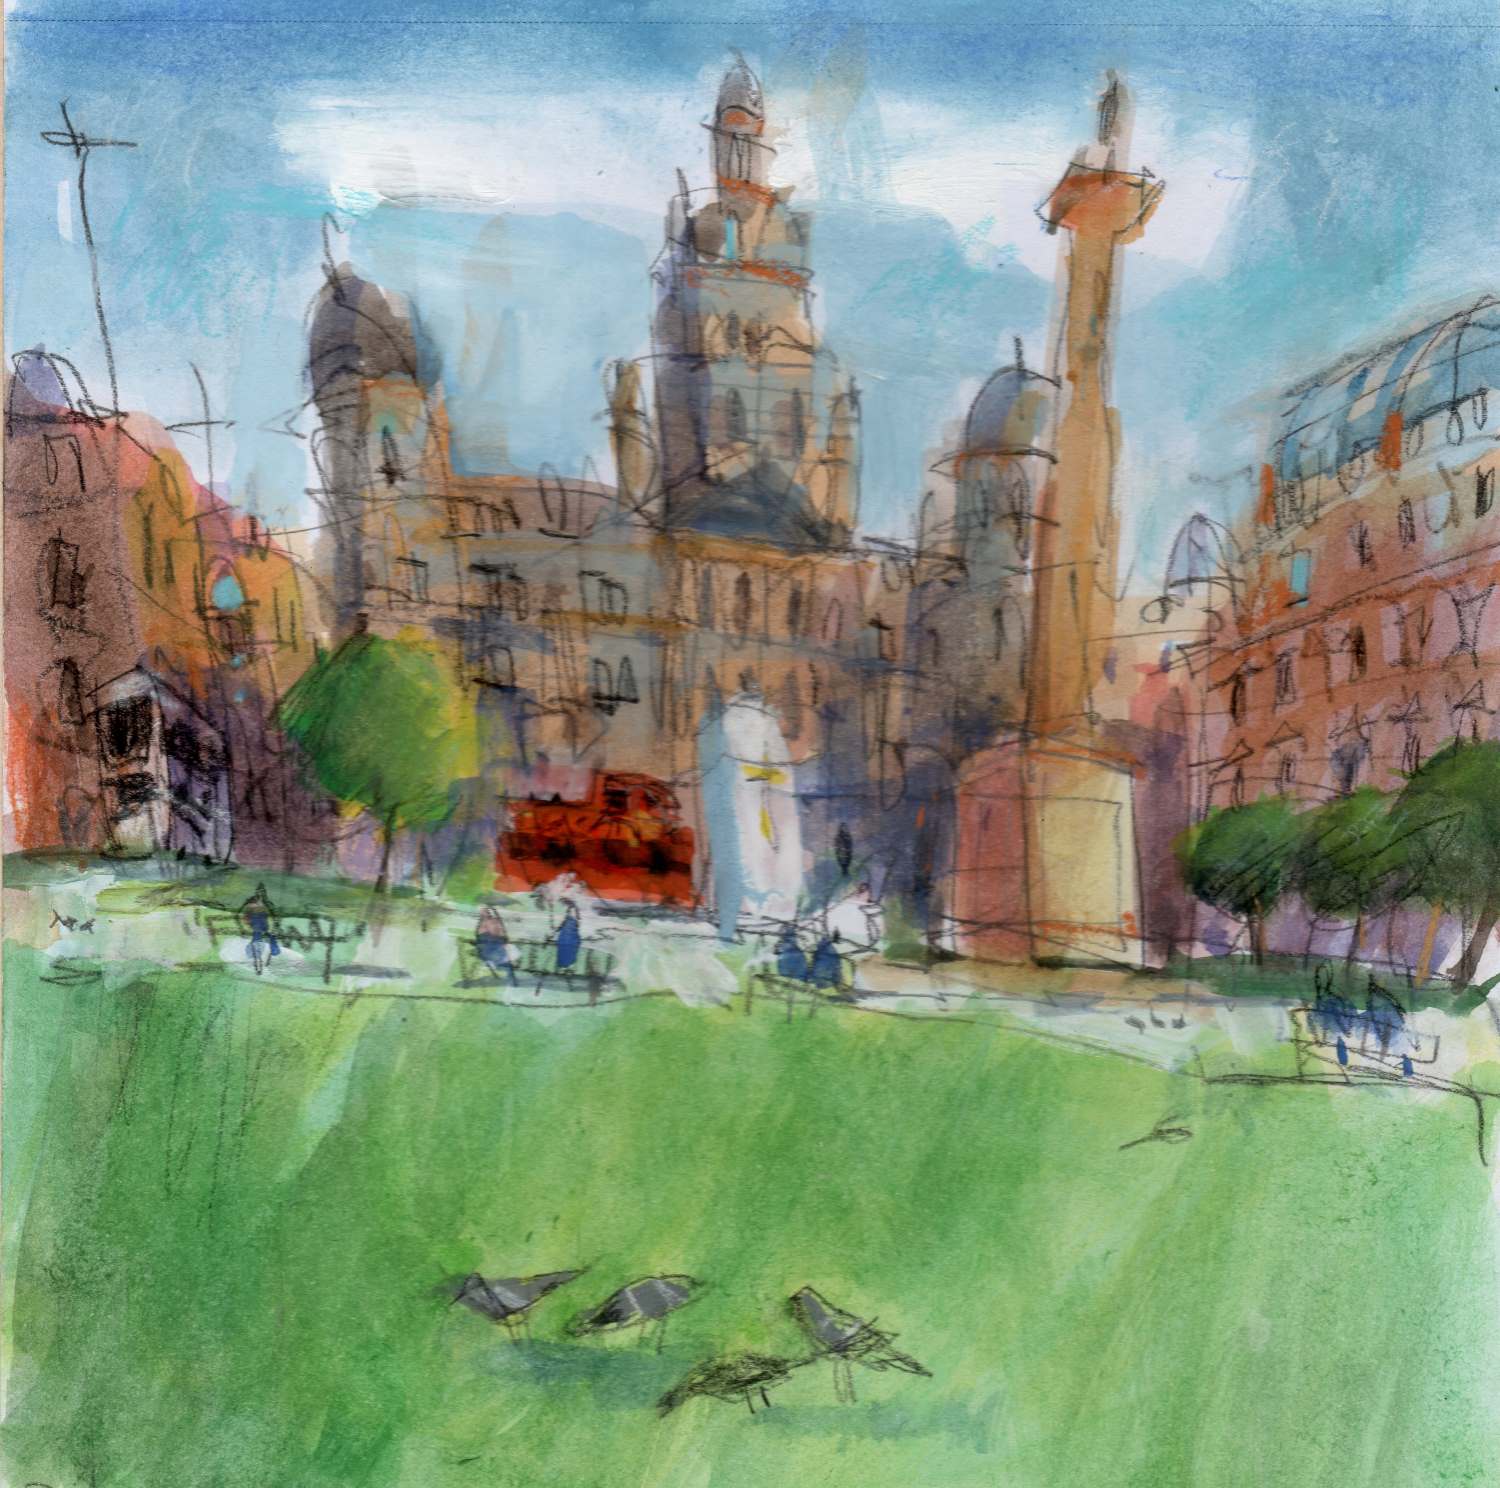 'George Square' by artist Ron Eardley